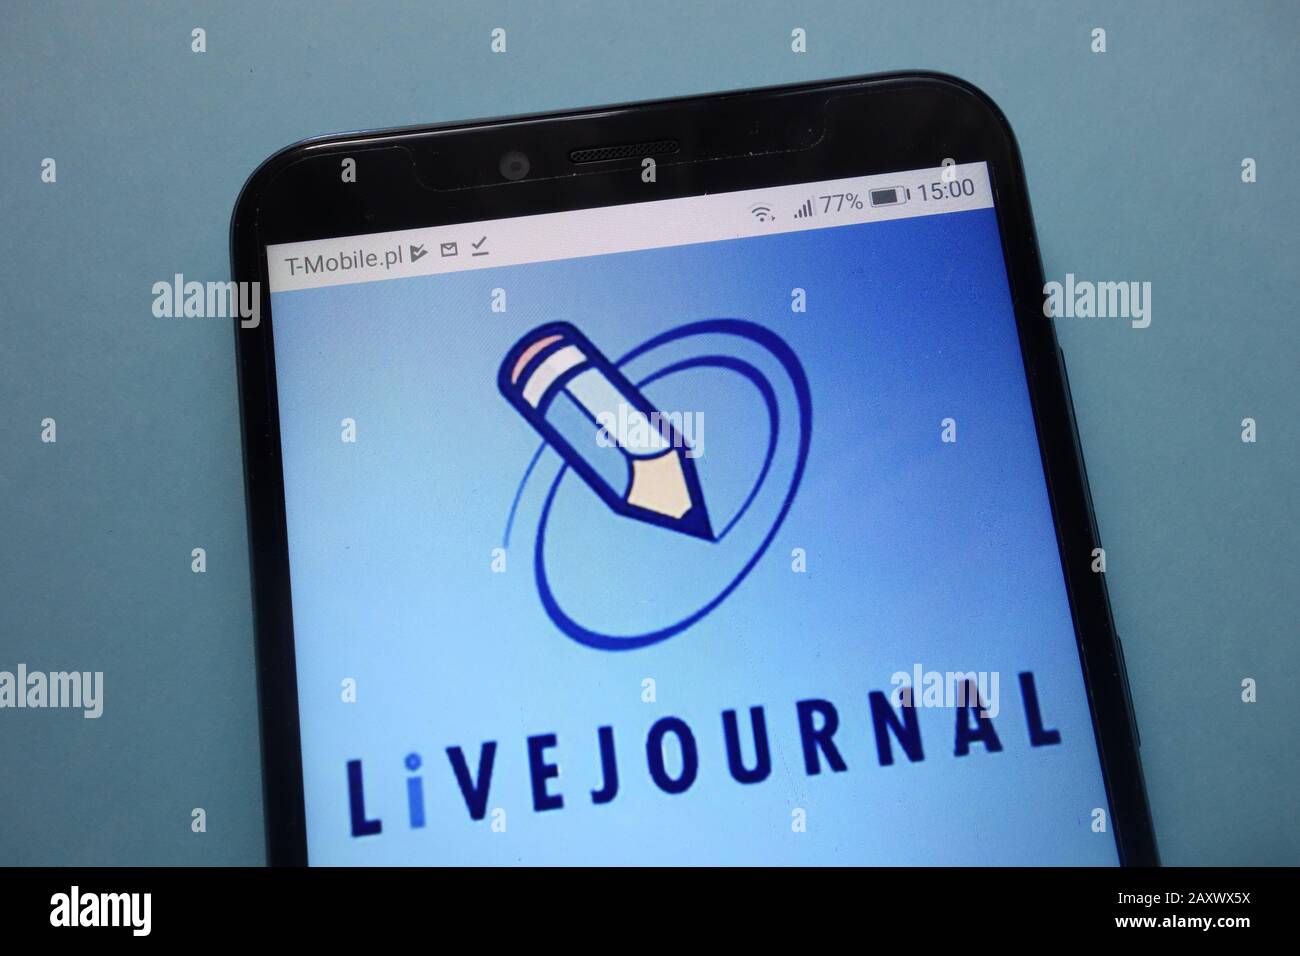 LiveJournal logo displayed on smartphone Stock Photo